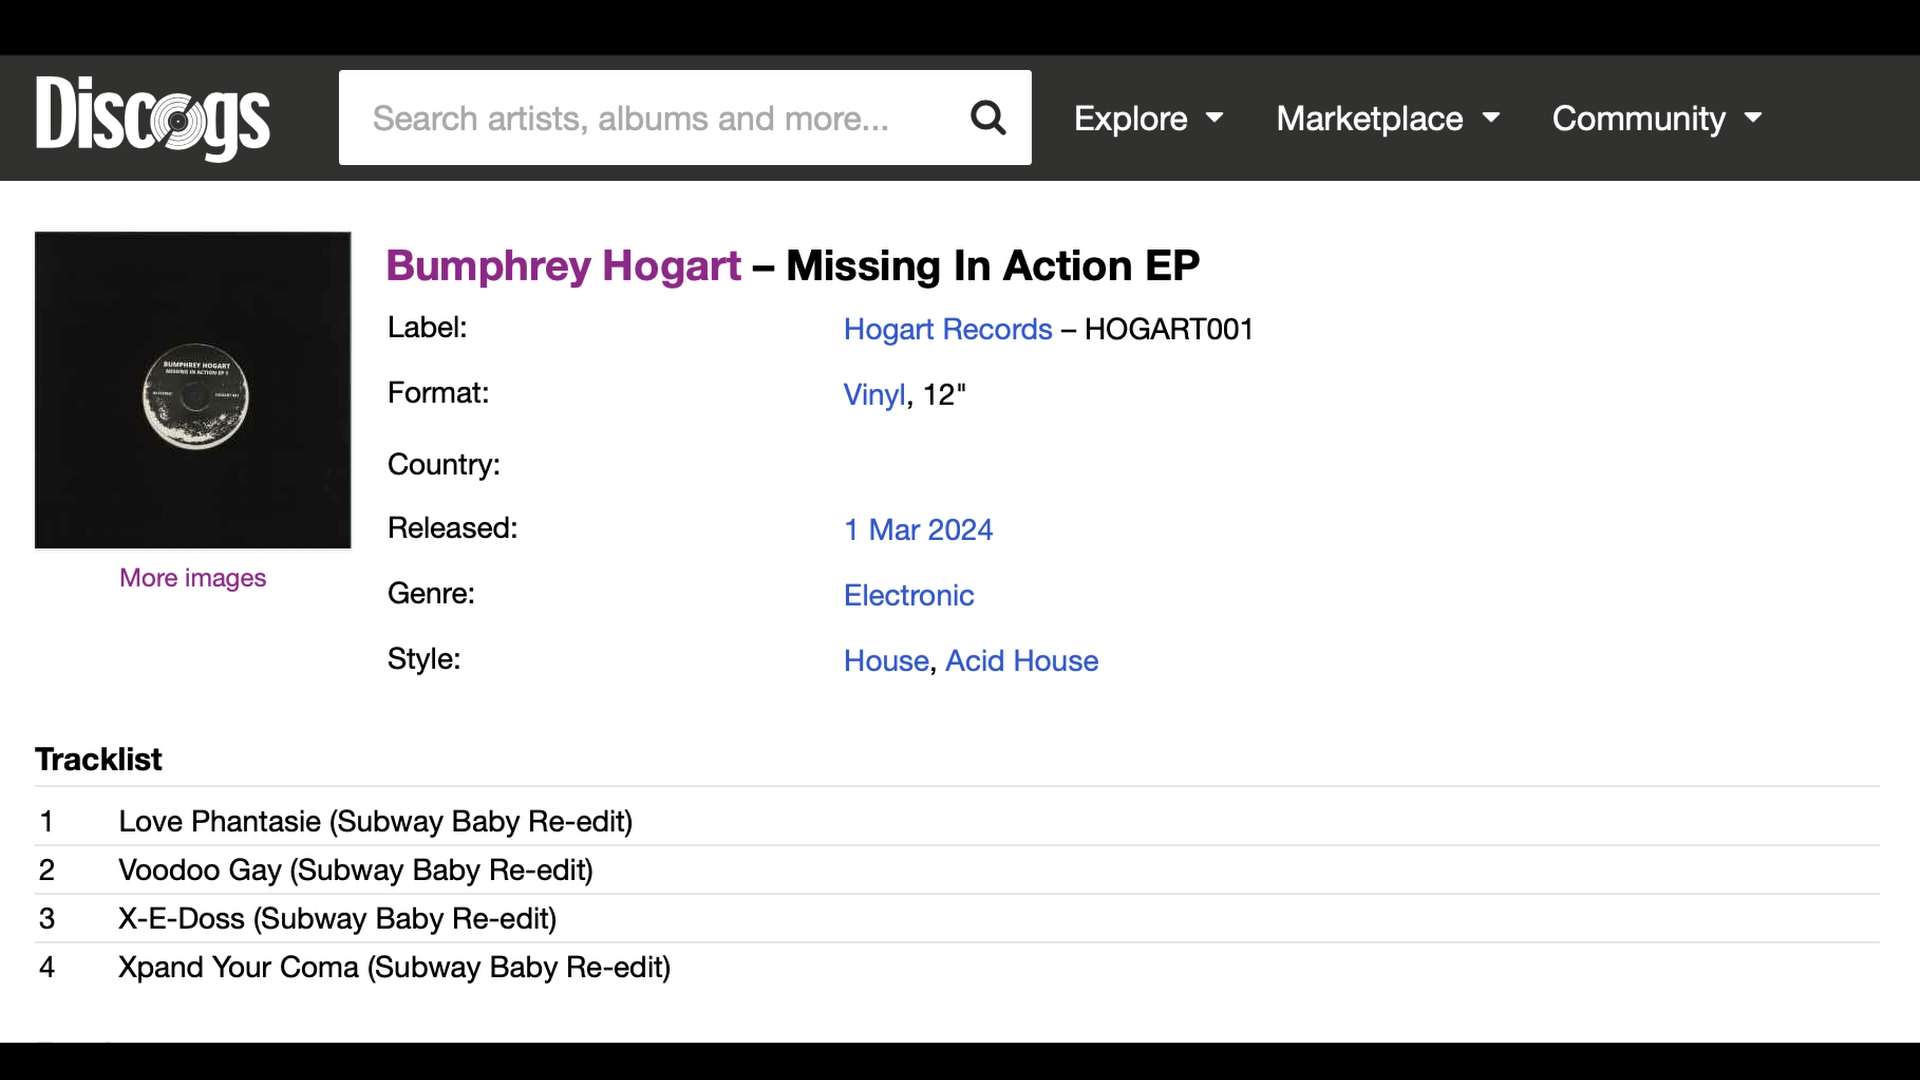 Bumphrey Hogart - Missing In Action EP - Discogs